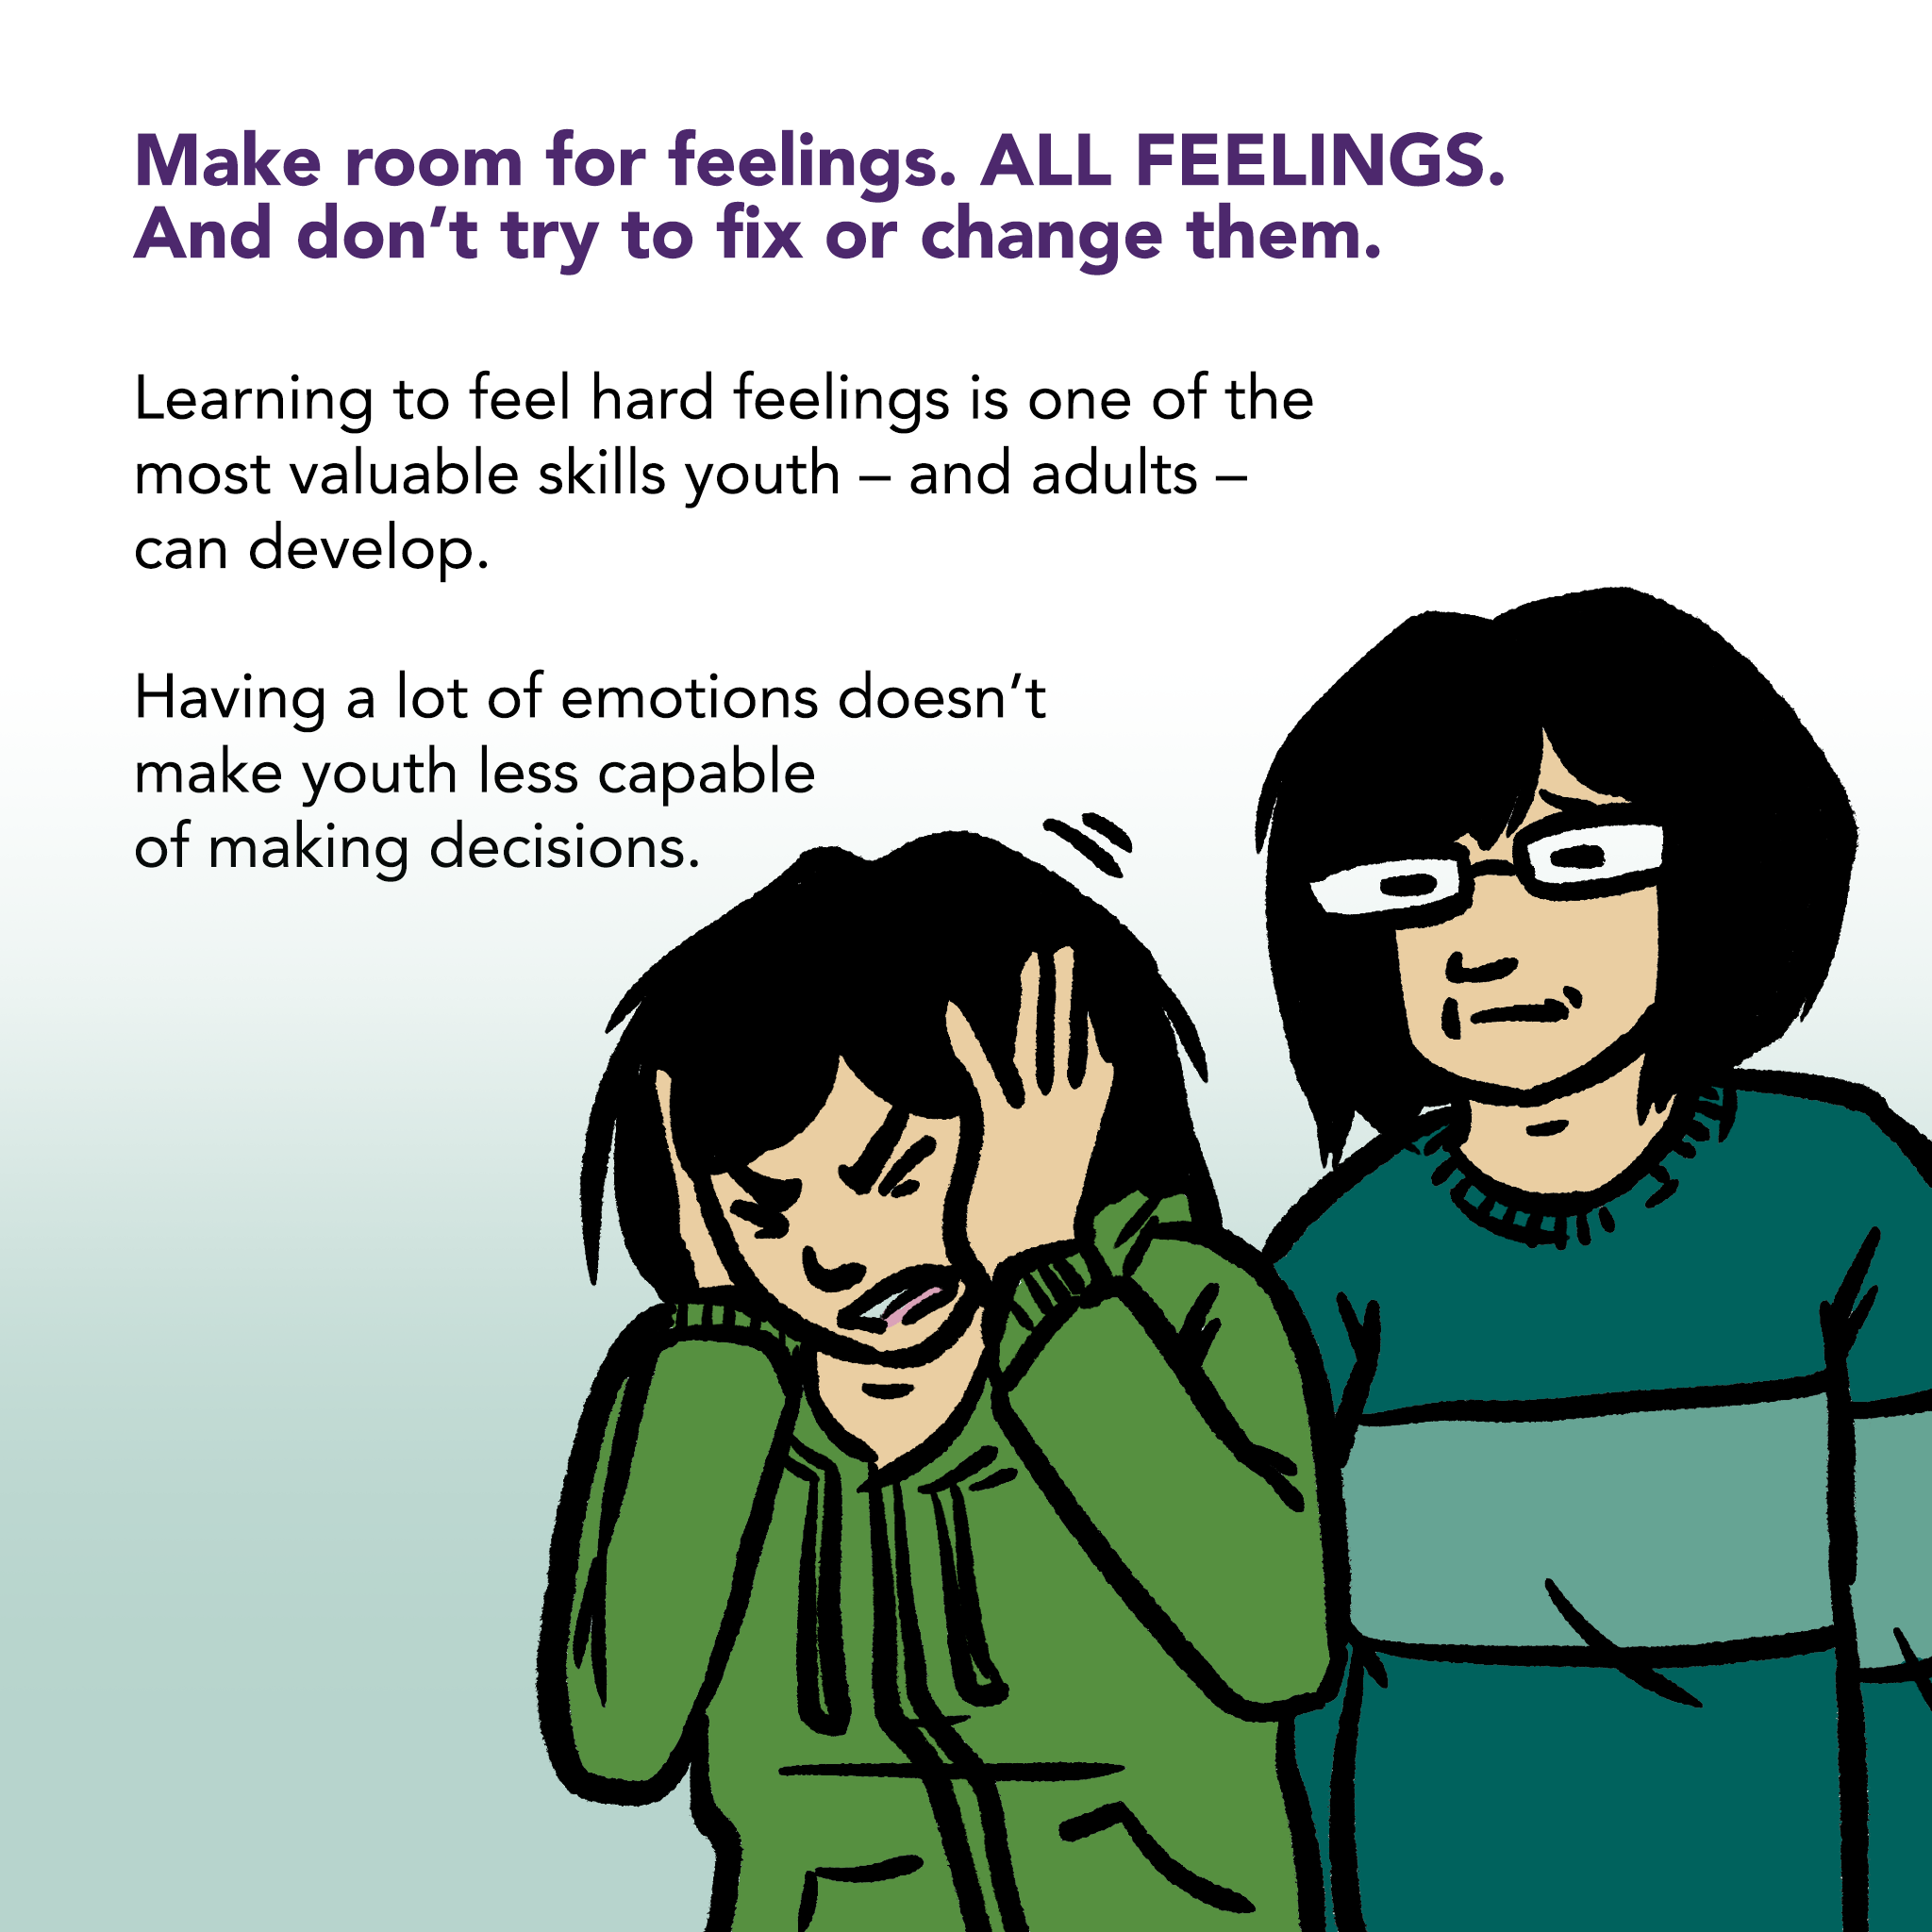 Image of a young person grimacing in frustration with closed eyes and hands over ears. An adult stands calmly in the background. Text says "Make room for feelings - ALL FEELINGS . And don't try to fix or change them. Learning to feel hard feelings is one of the most valuable skills youth - and adults - can develop. Having a lot of emotions doesn't make youth less capable of making decisions."